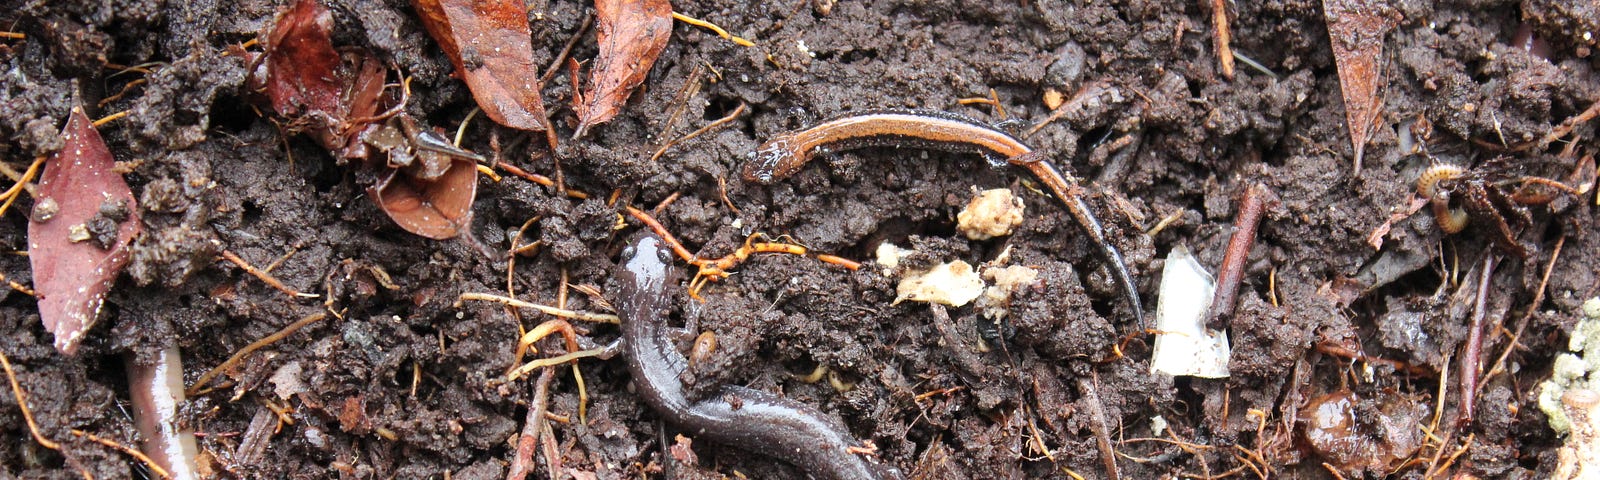 dark salamanders and worms on the earthy forest floor